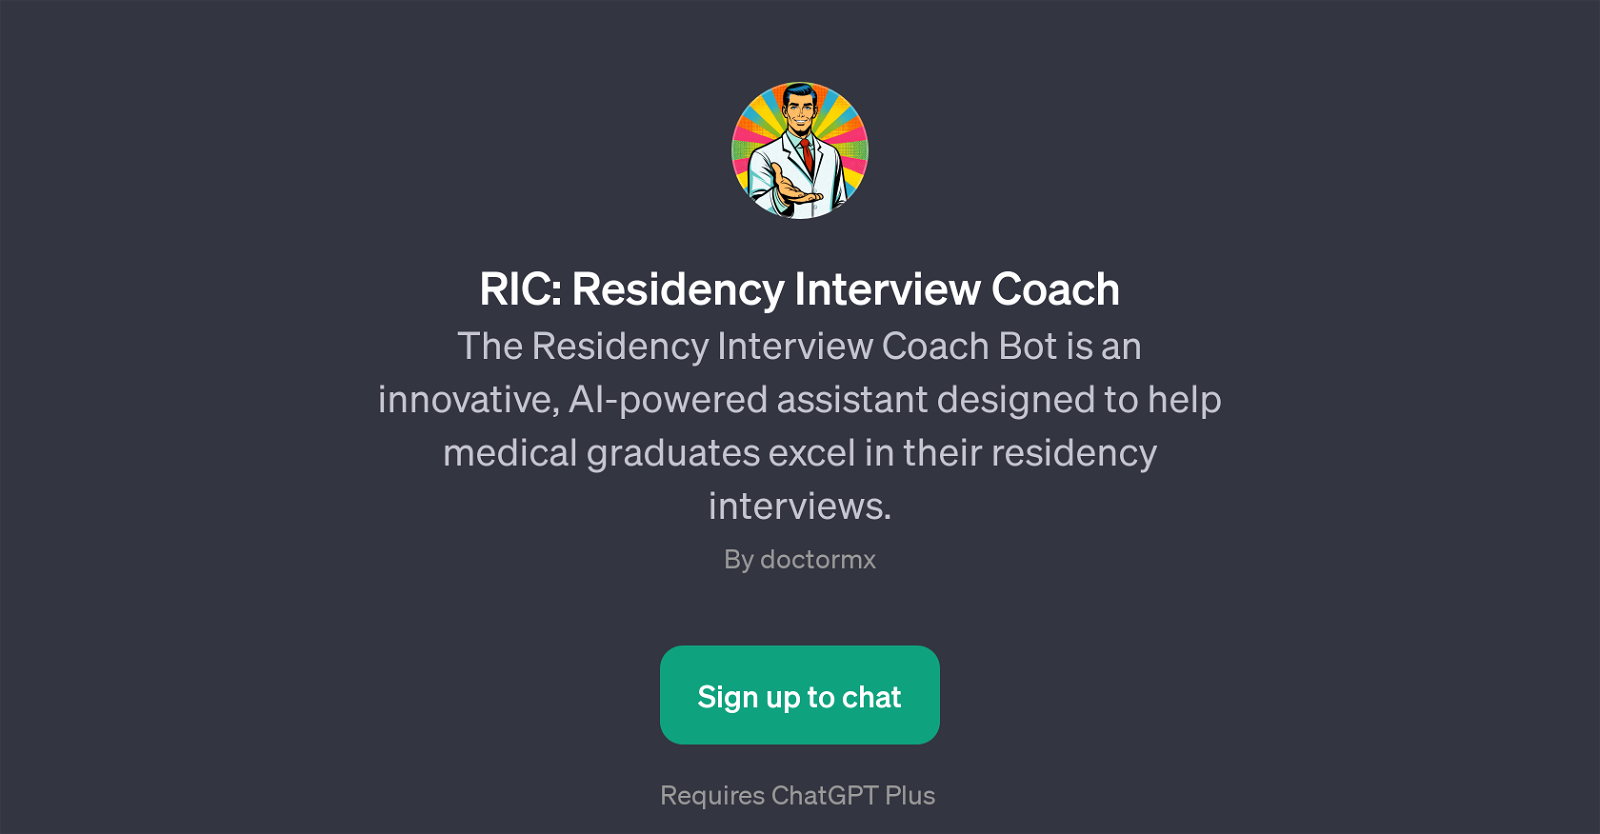 RIC: Residency Interview Coach website